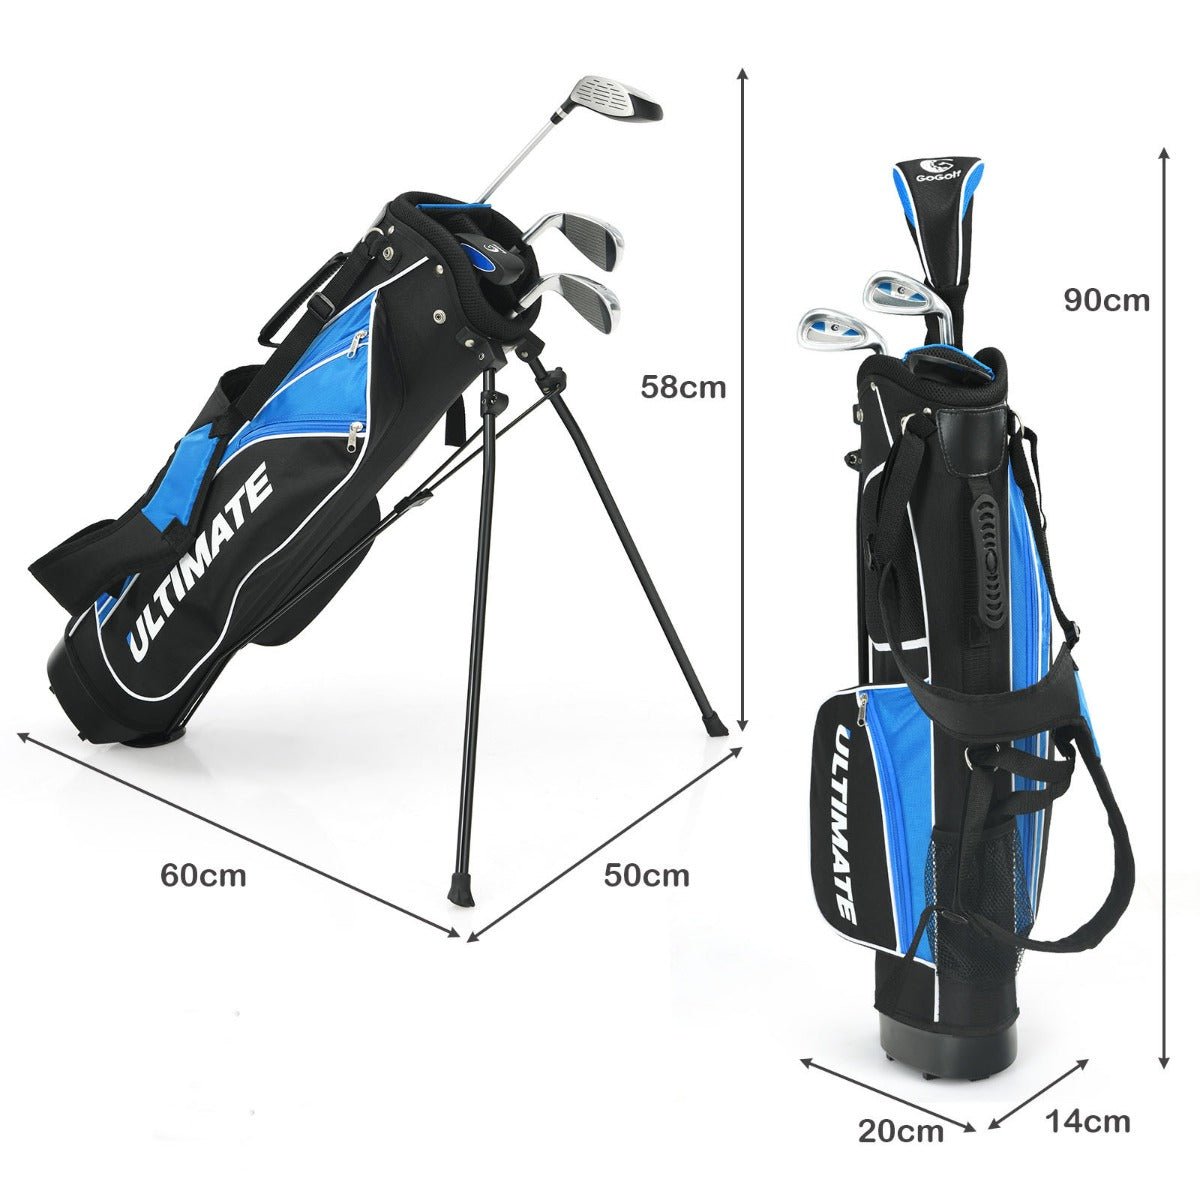 Beginner Golf Club Set for Kids with Fairway Wood and Irons